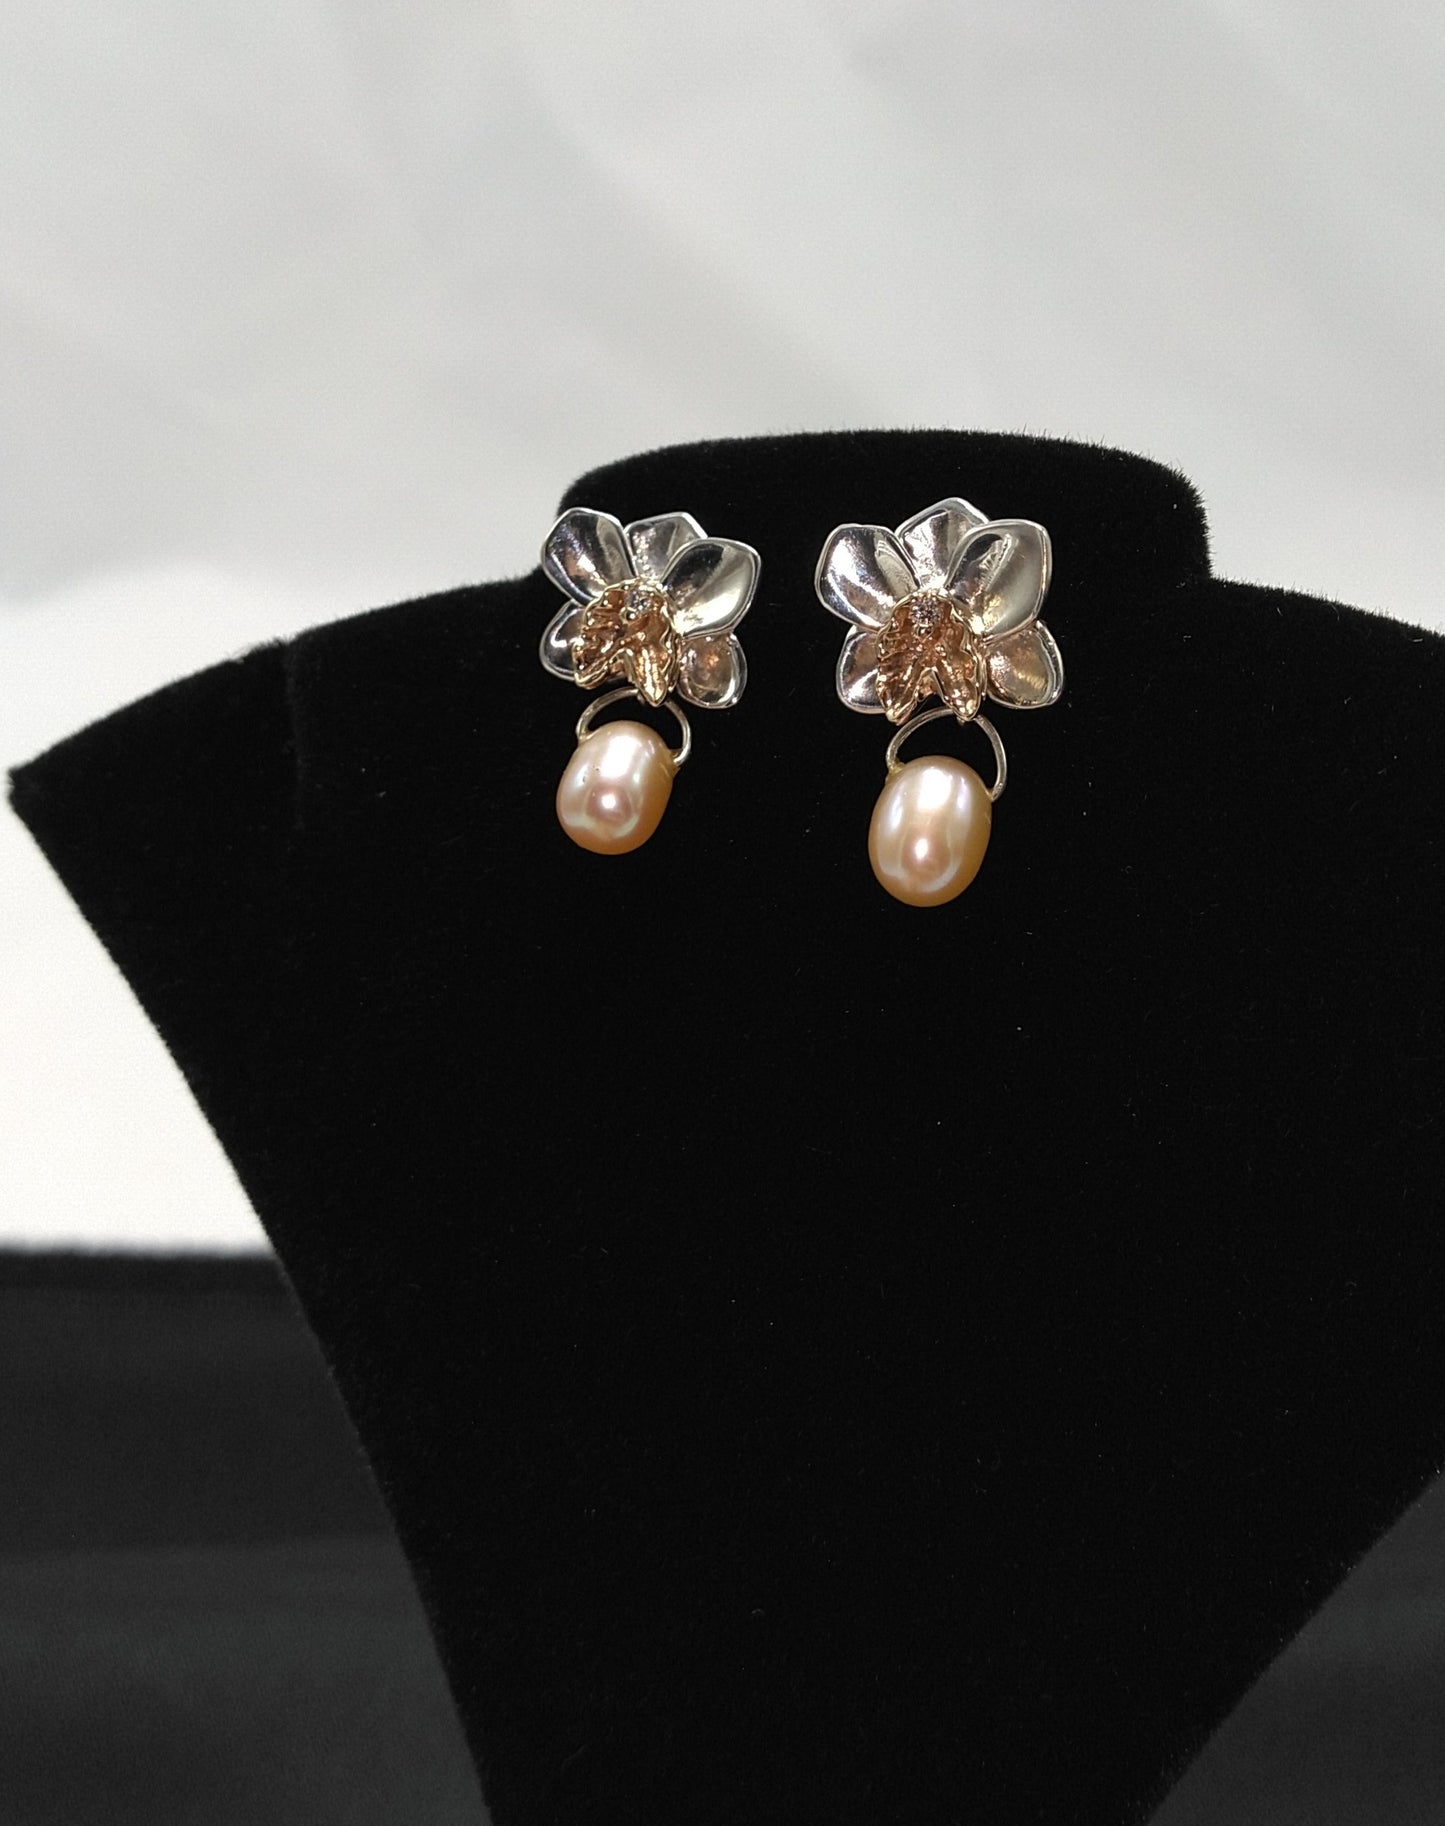 Orchid Studs in Silver and 14K Yellow Gold with Diamonds and Freshwater Pearls